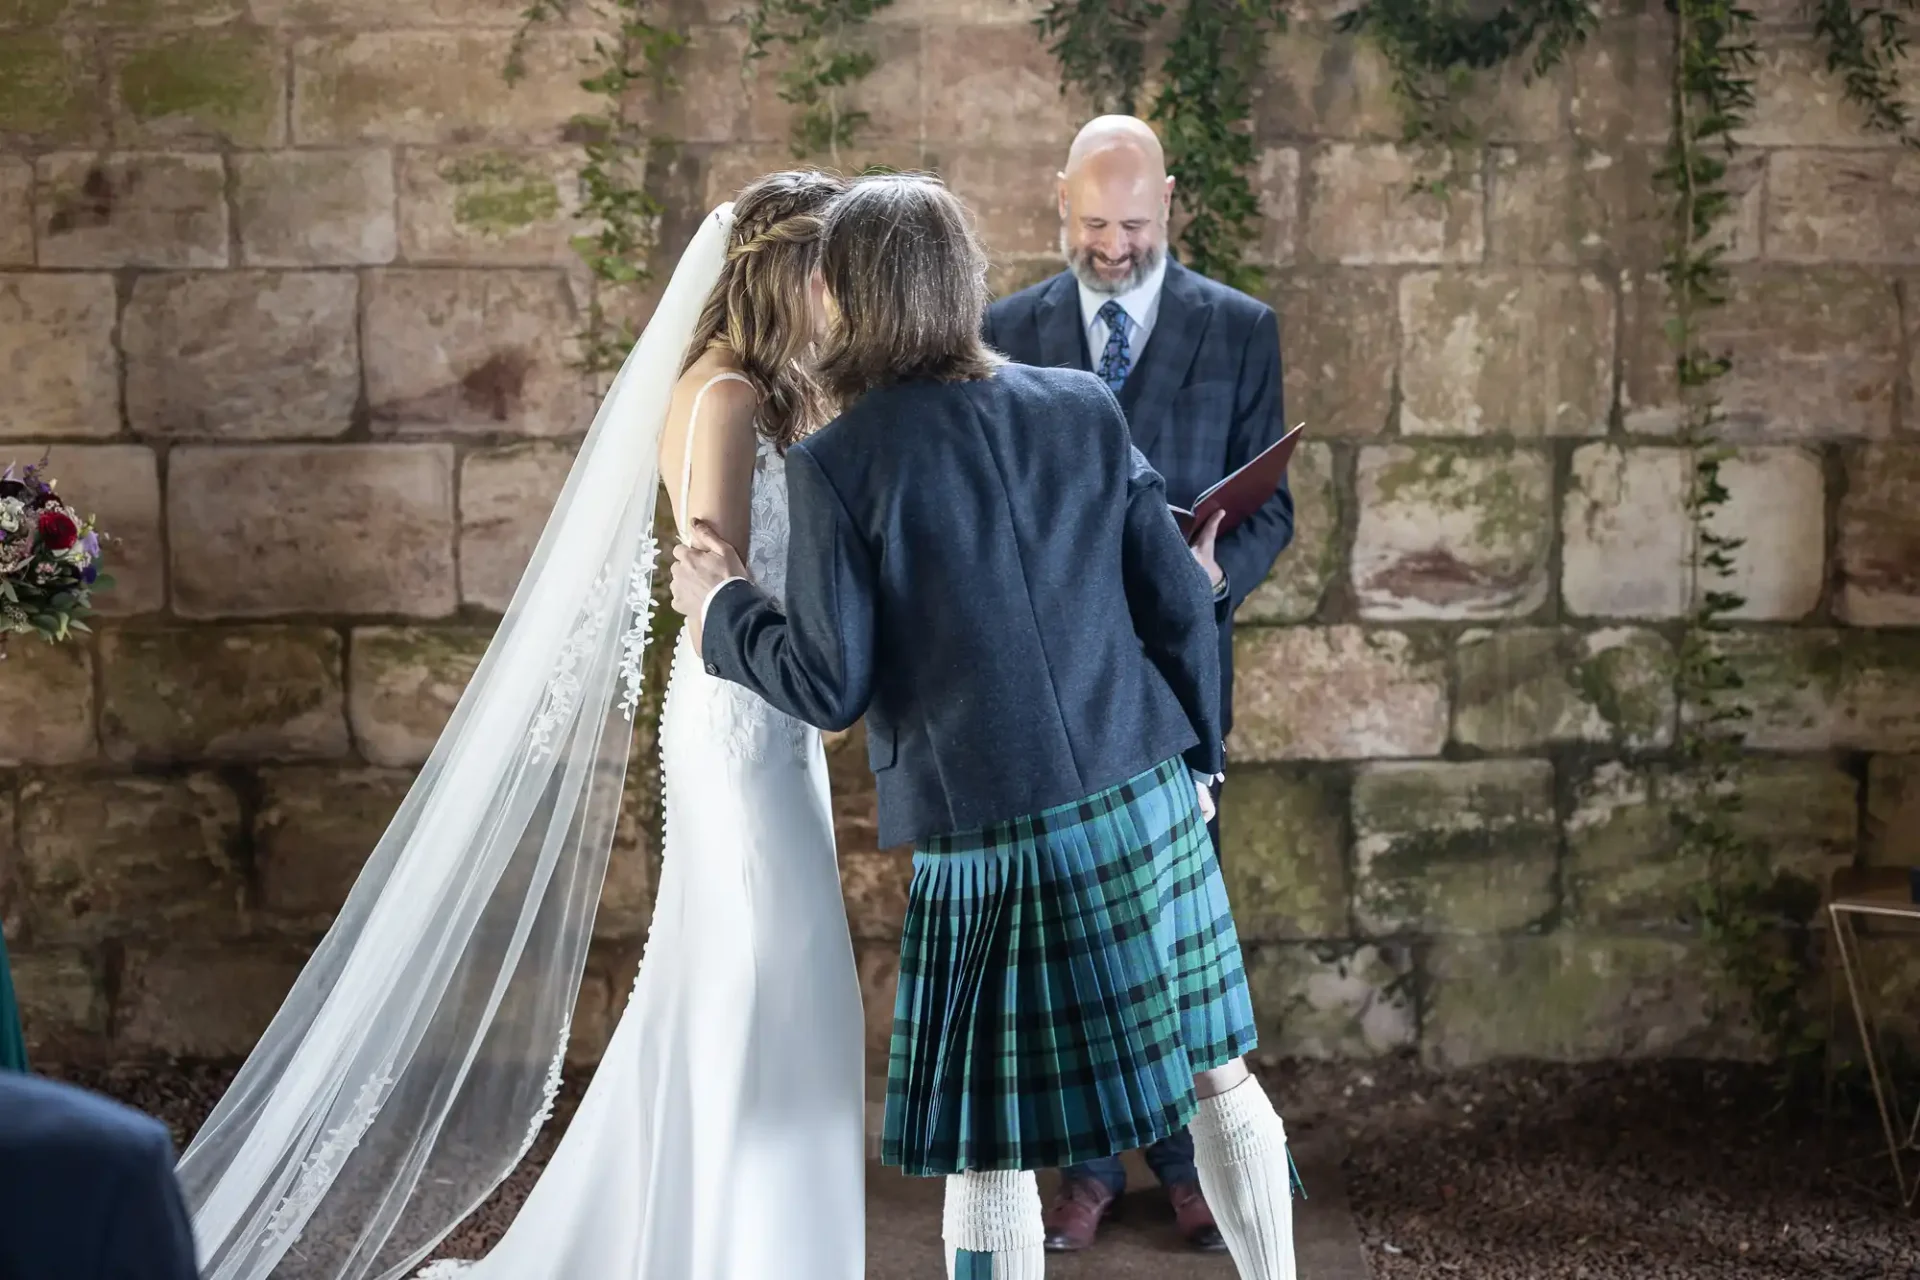 A bride in a white dress kisses a man in a kilt, while an officiant stands behind them, in front of a stone wall decorated with greenery.